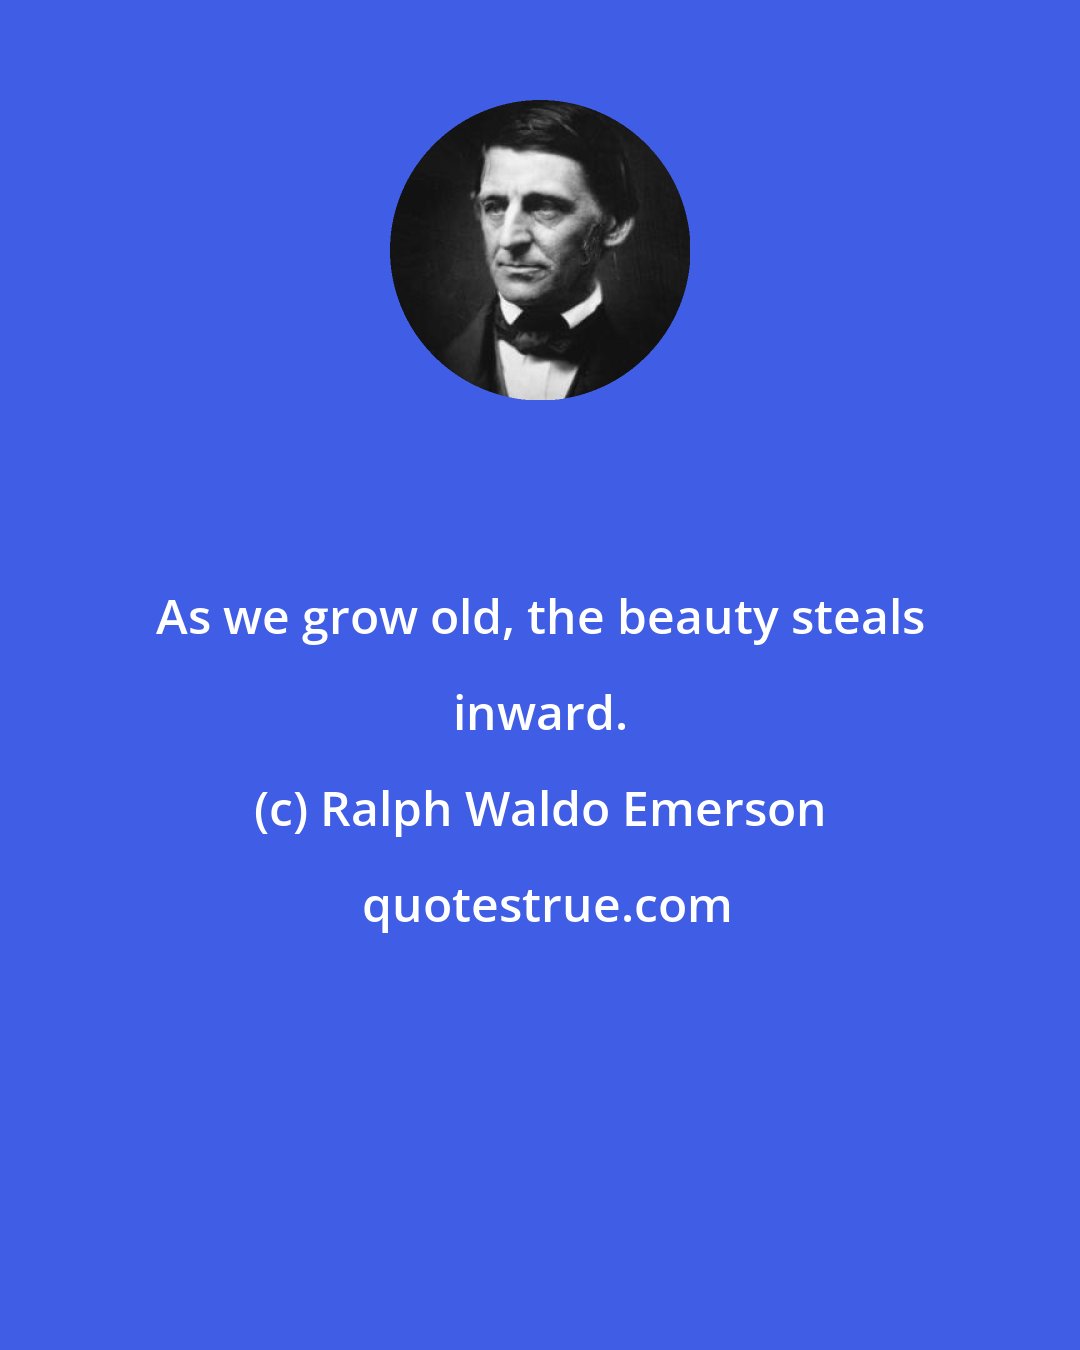 Ralph Waldo Emerson: As we grow old, the beauty steals inward.